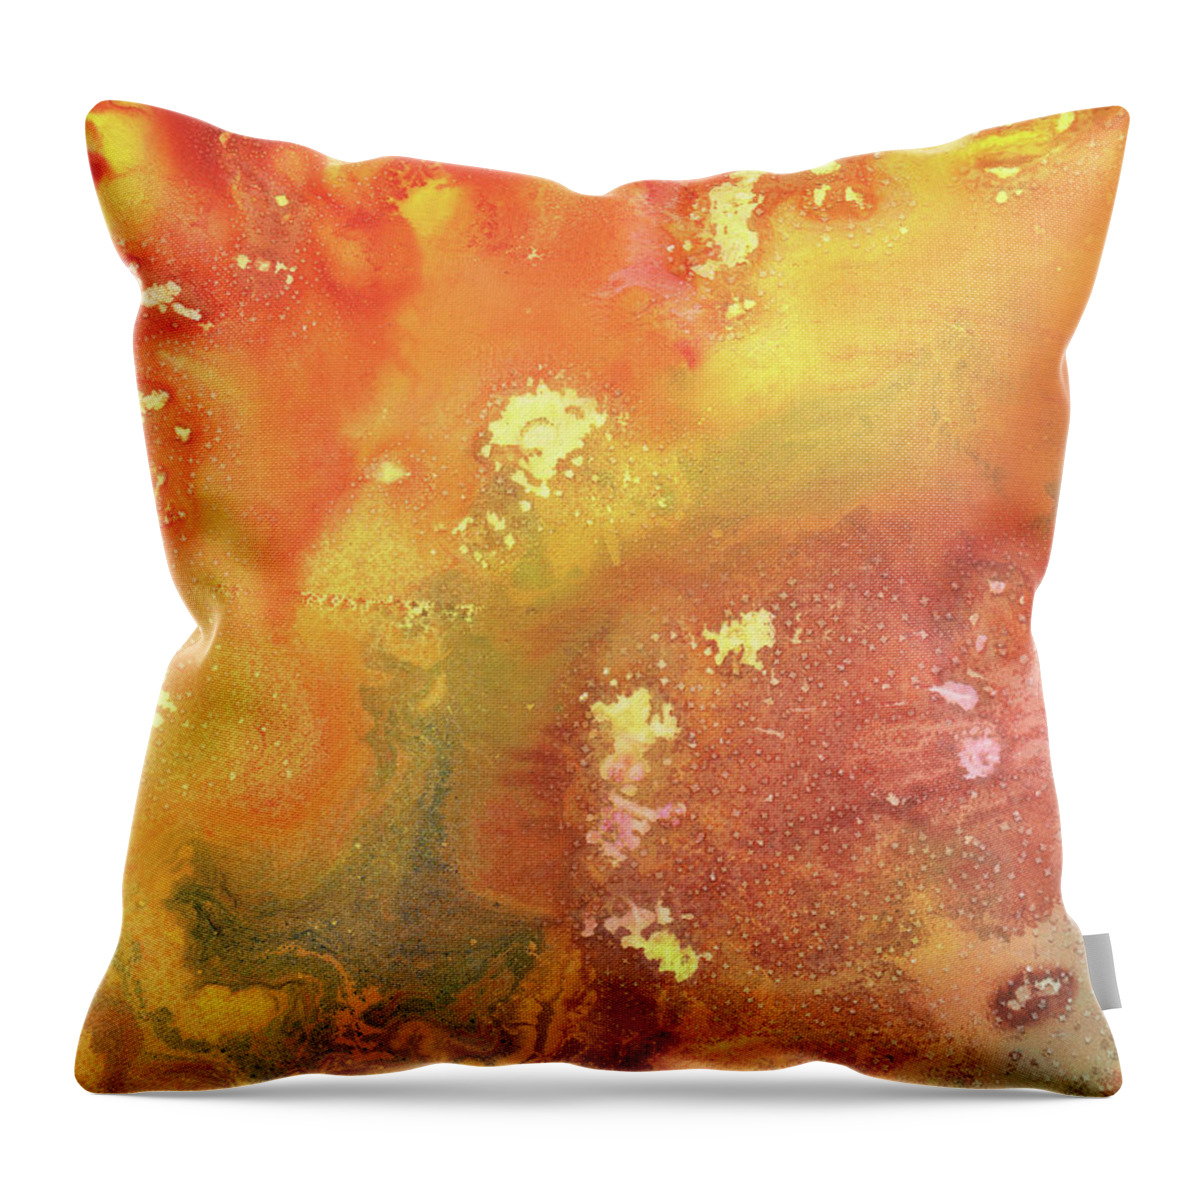 Abstract Throw Pillow featuring the painting Celestial Breeze Synergy Of Crystal And Abstract Watercolor Decor I by Irina Sztukowski